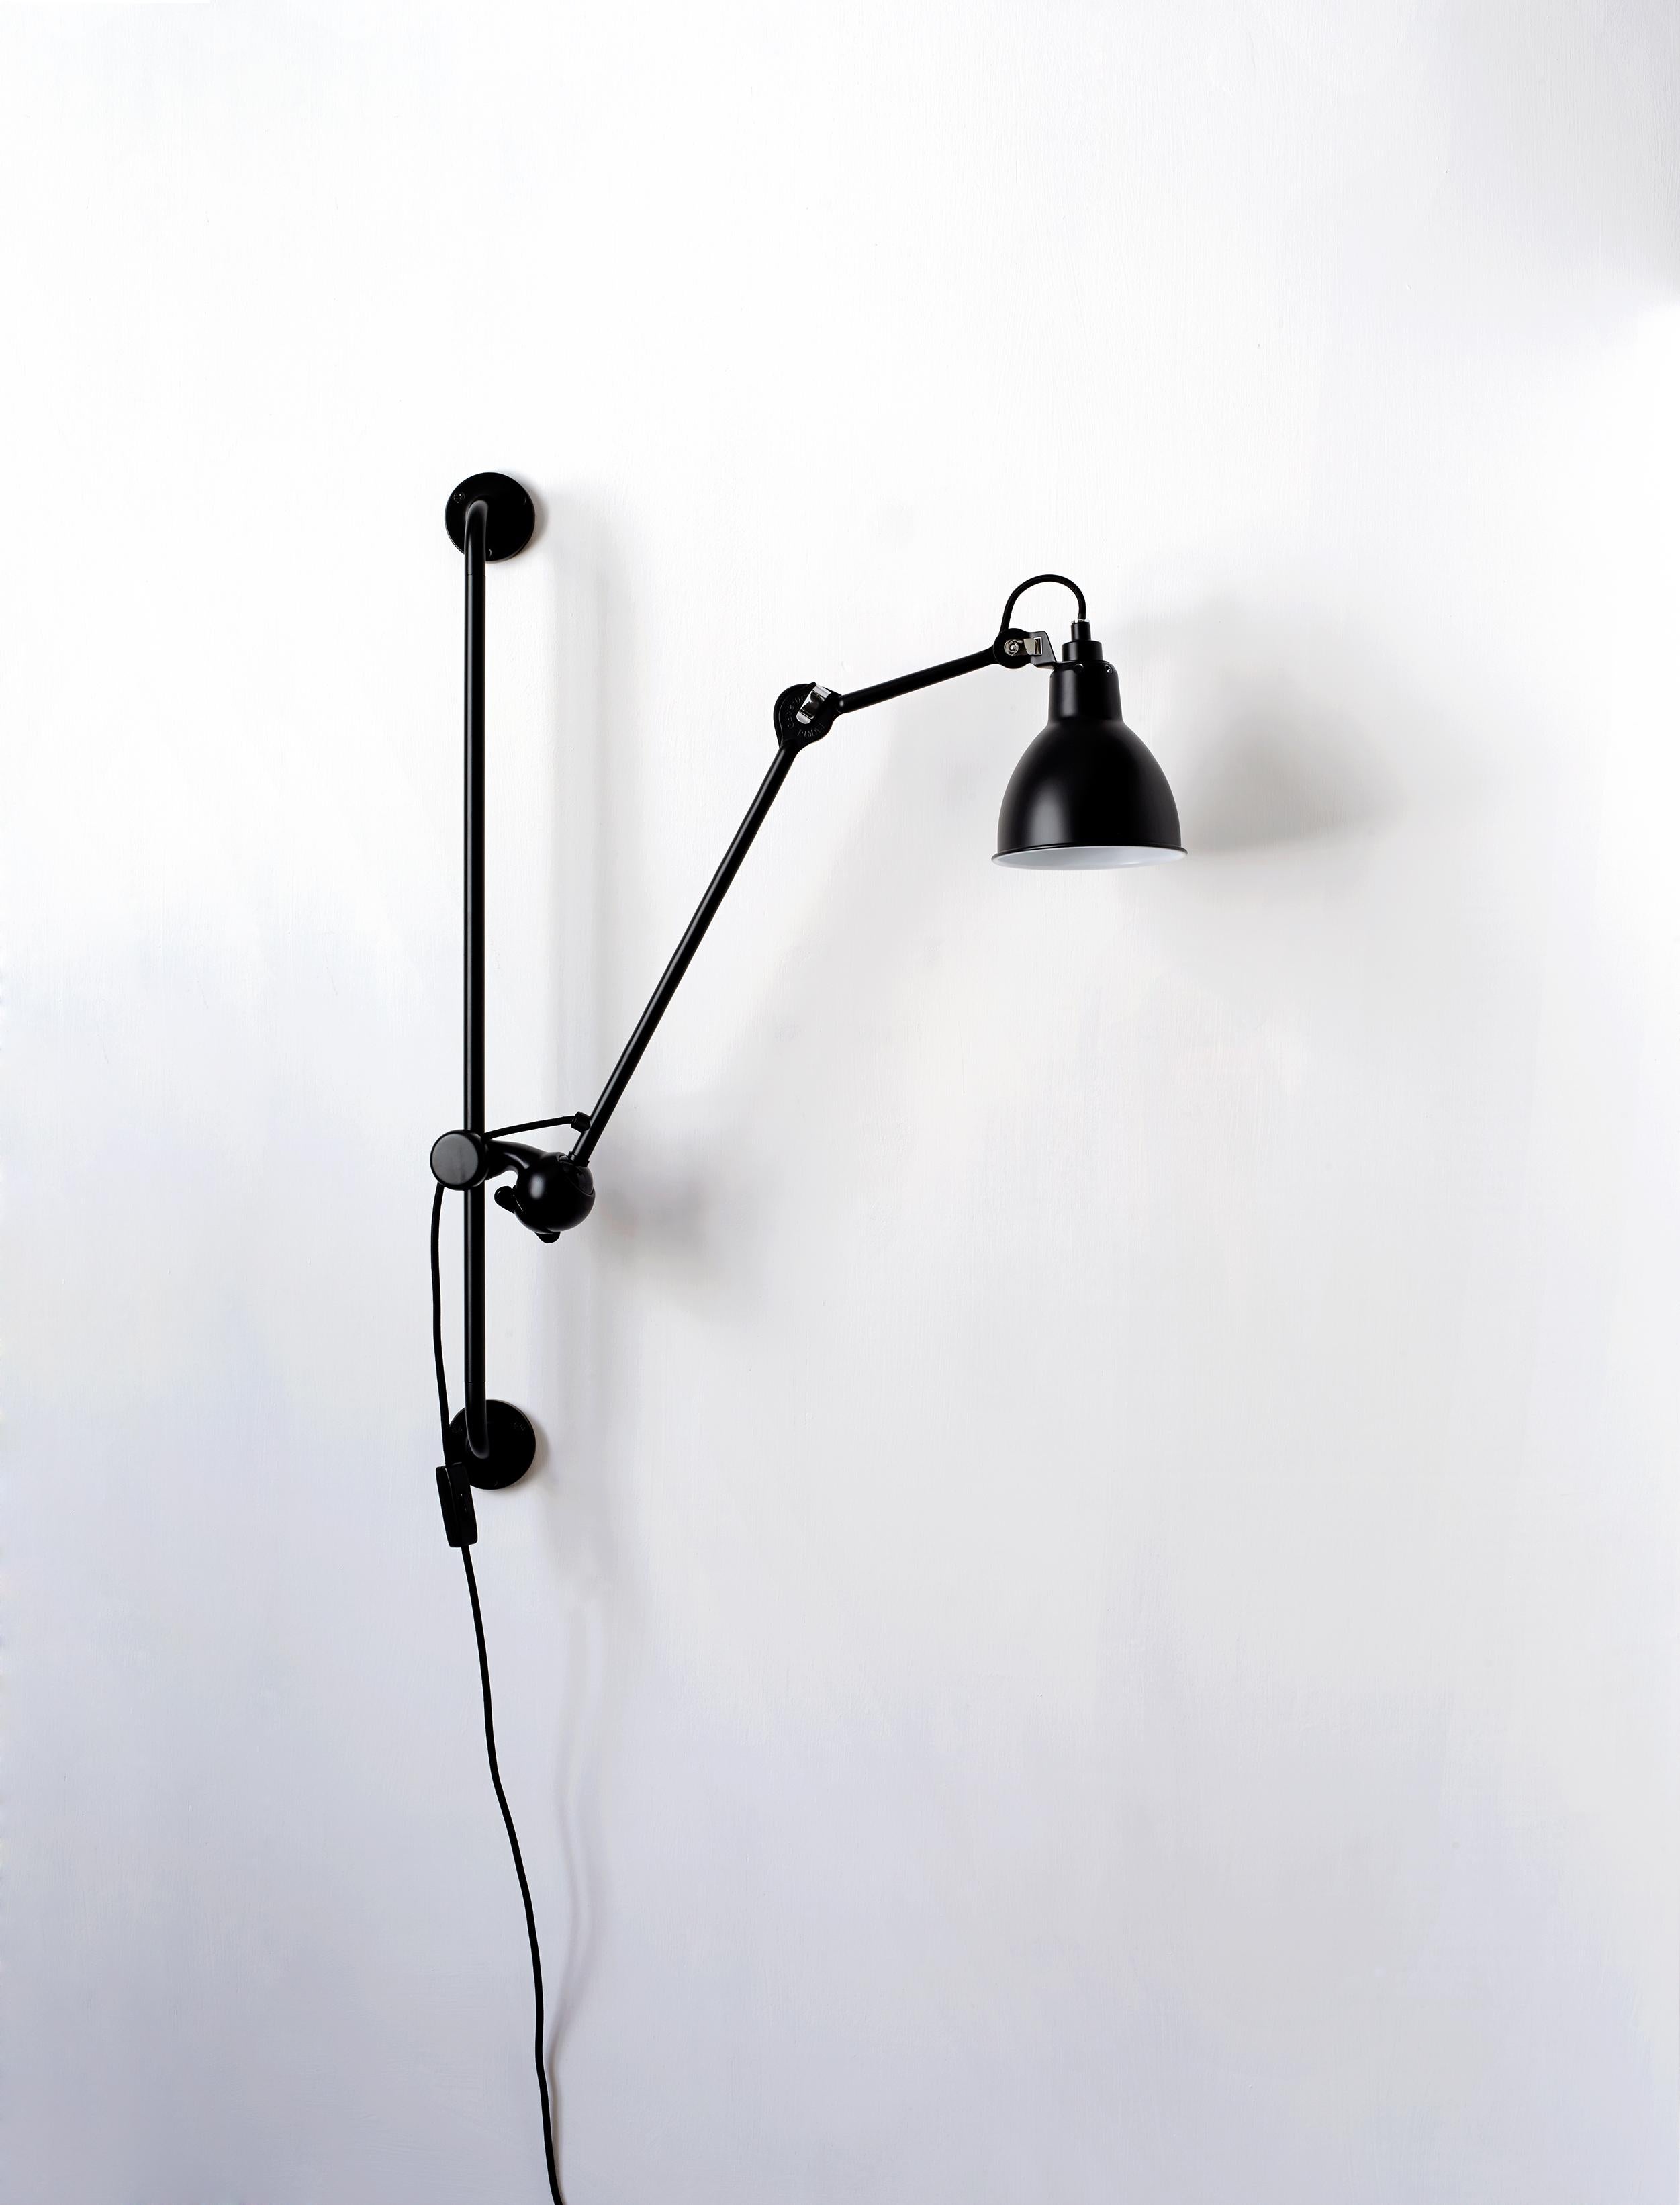 DCW Editions La Lampe Gras N°210 Wall Lamp in Black Steel Arm and Black Shade by Bernard-Albin Gras
 
 In 1921 Bernard-Albin GRAS designed a series of lamps for use in offices and in industrial environments. The GRAS lamp, as it was subsequently